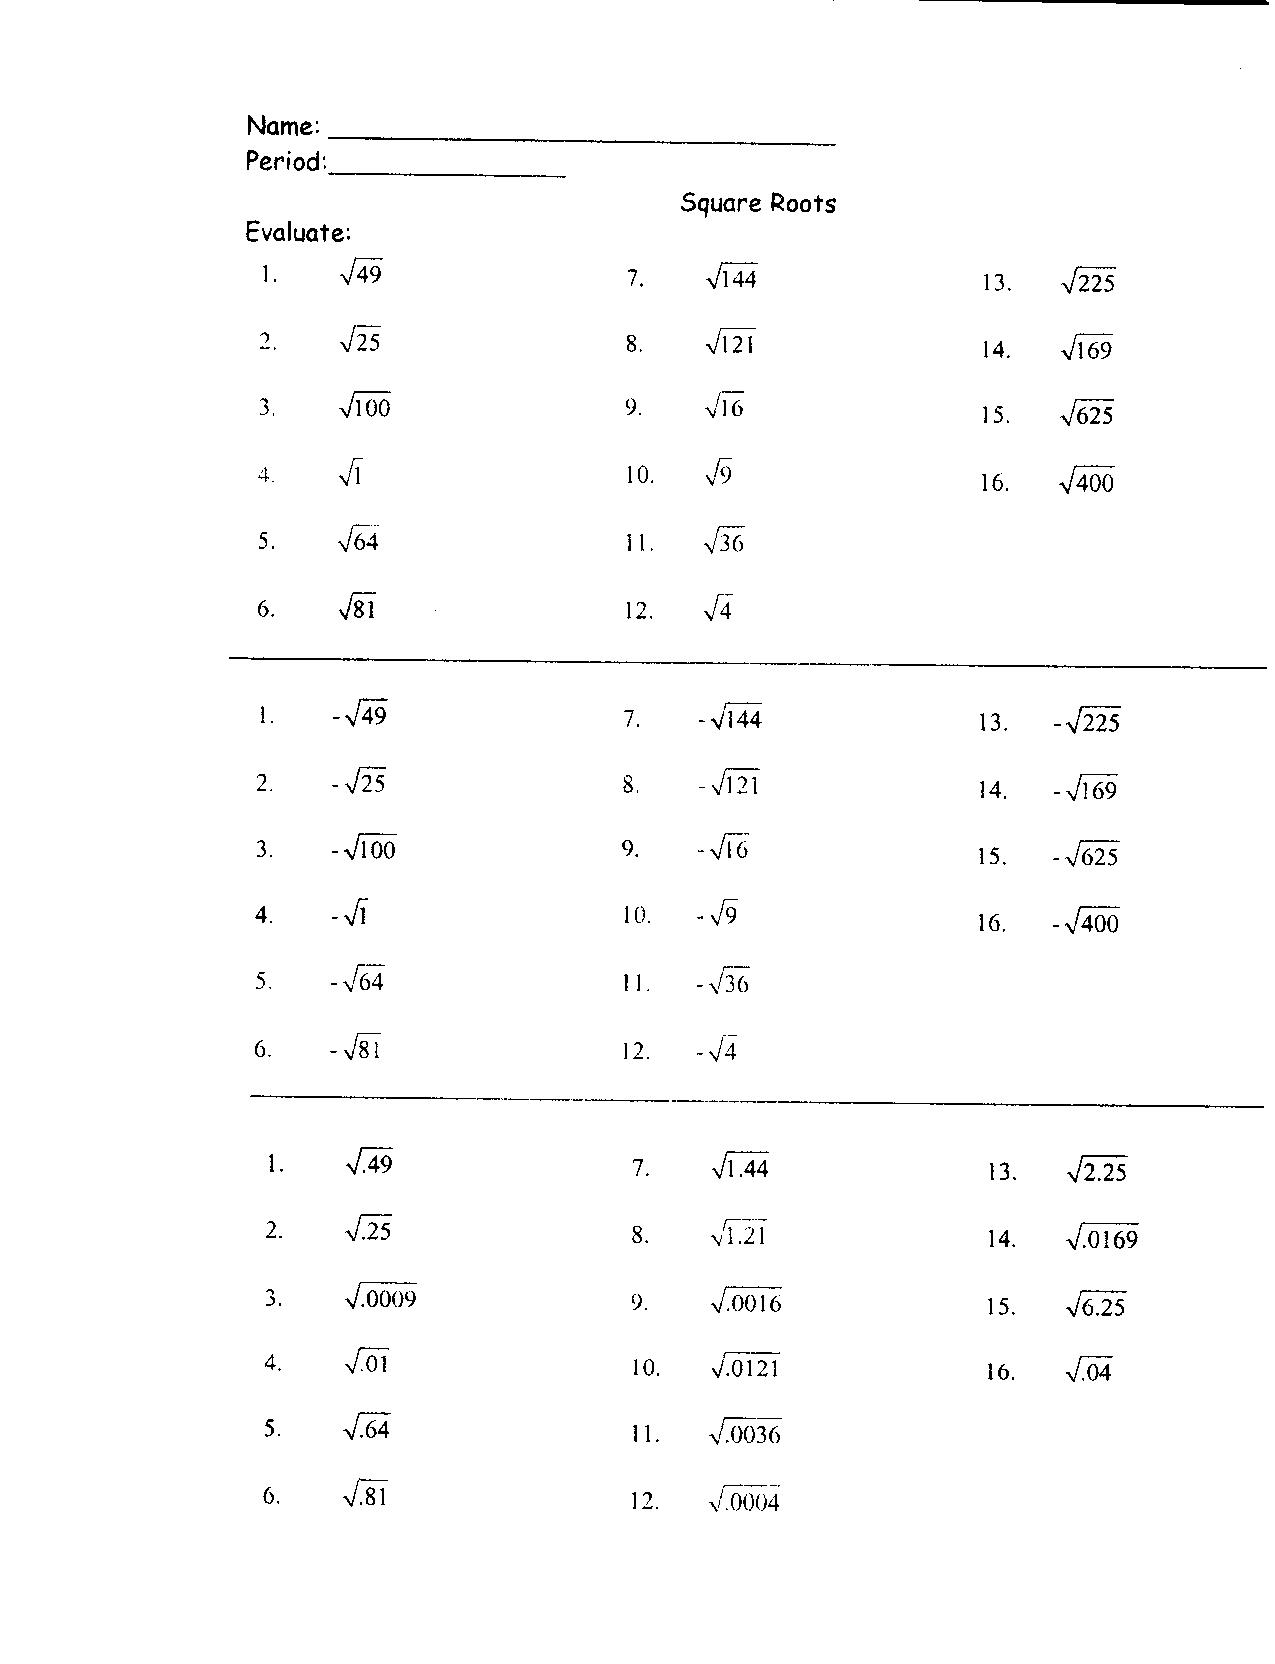 Perfect Square Roots Worksheet Image